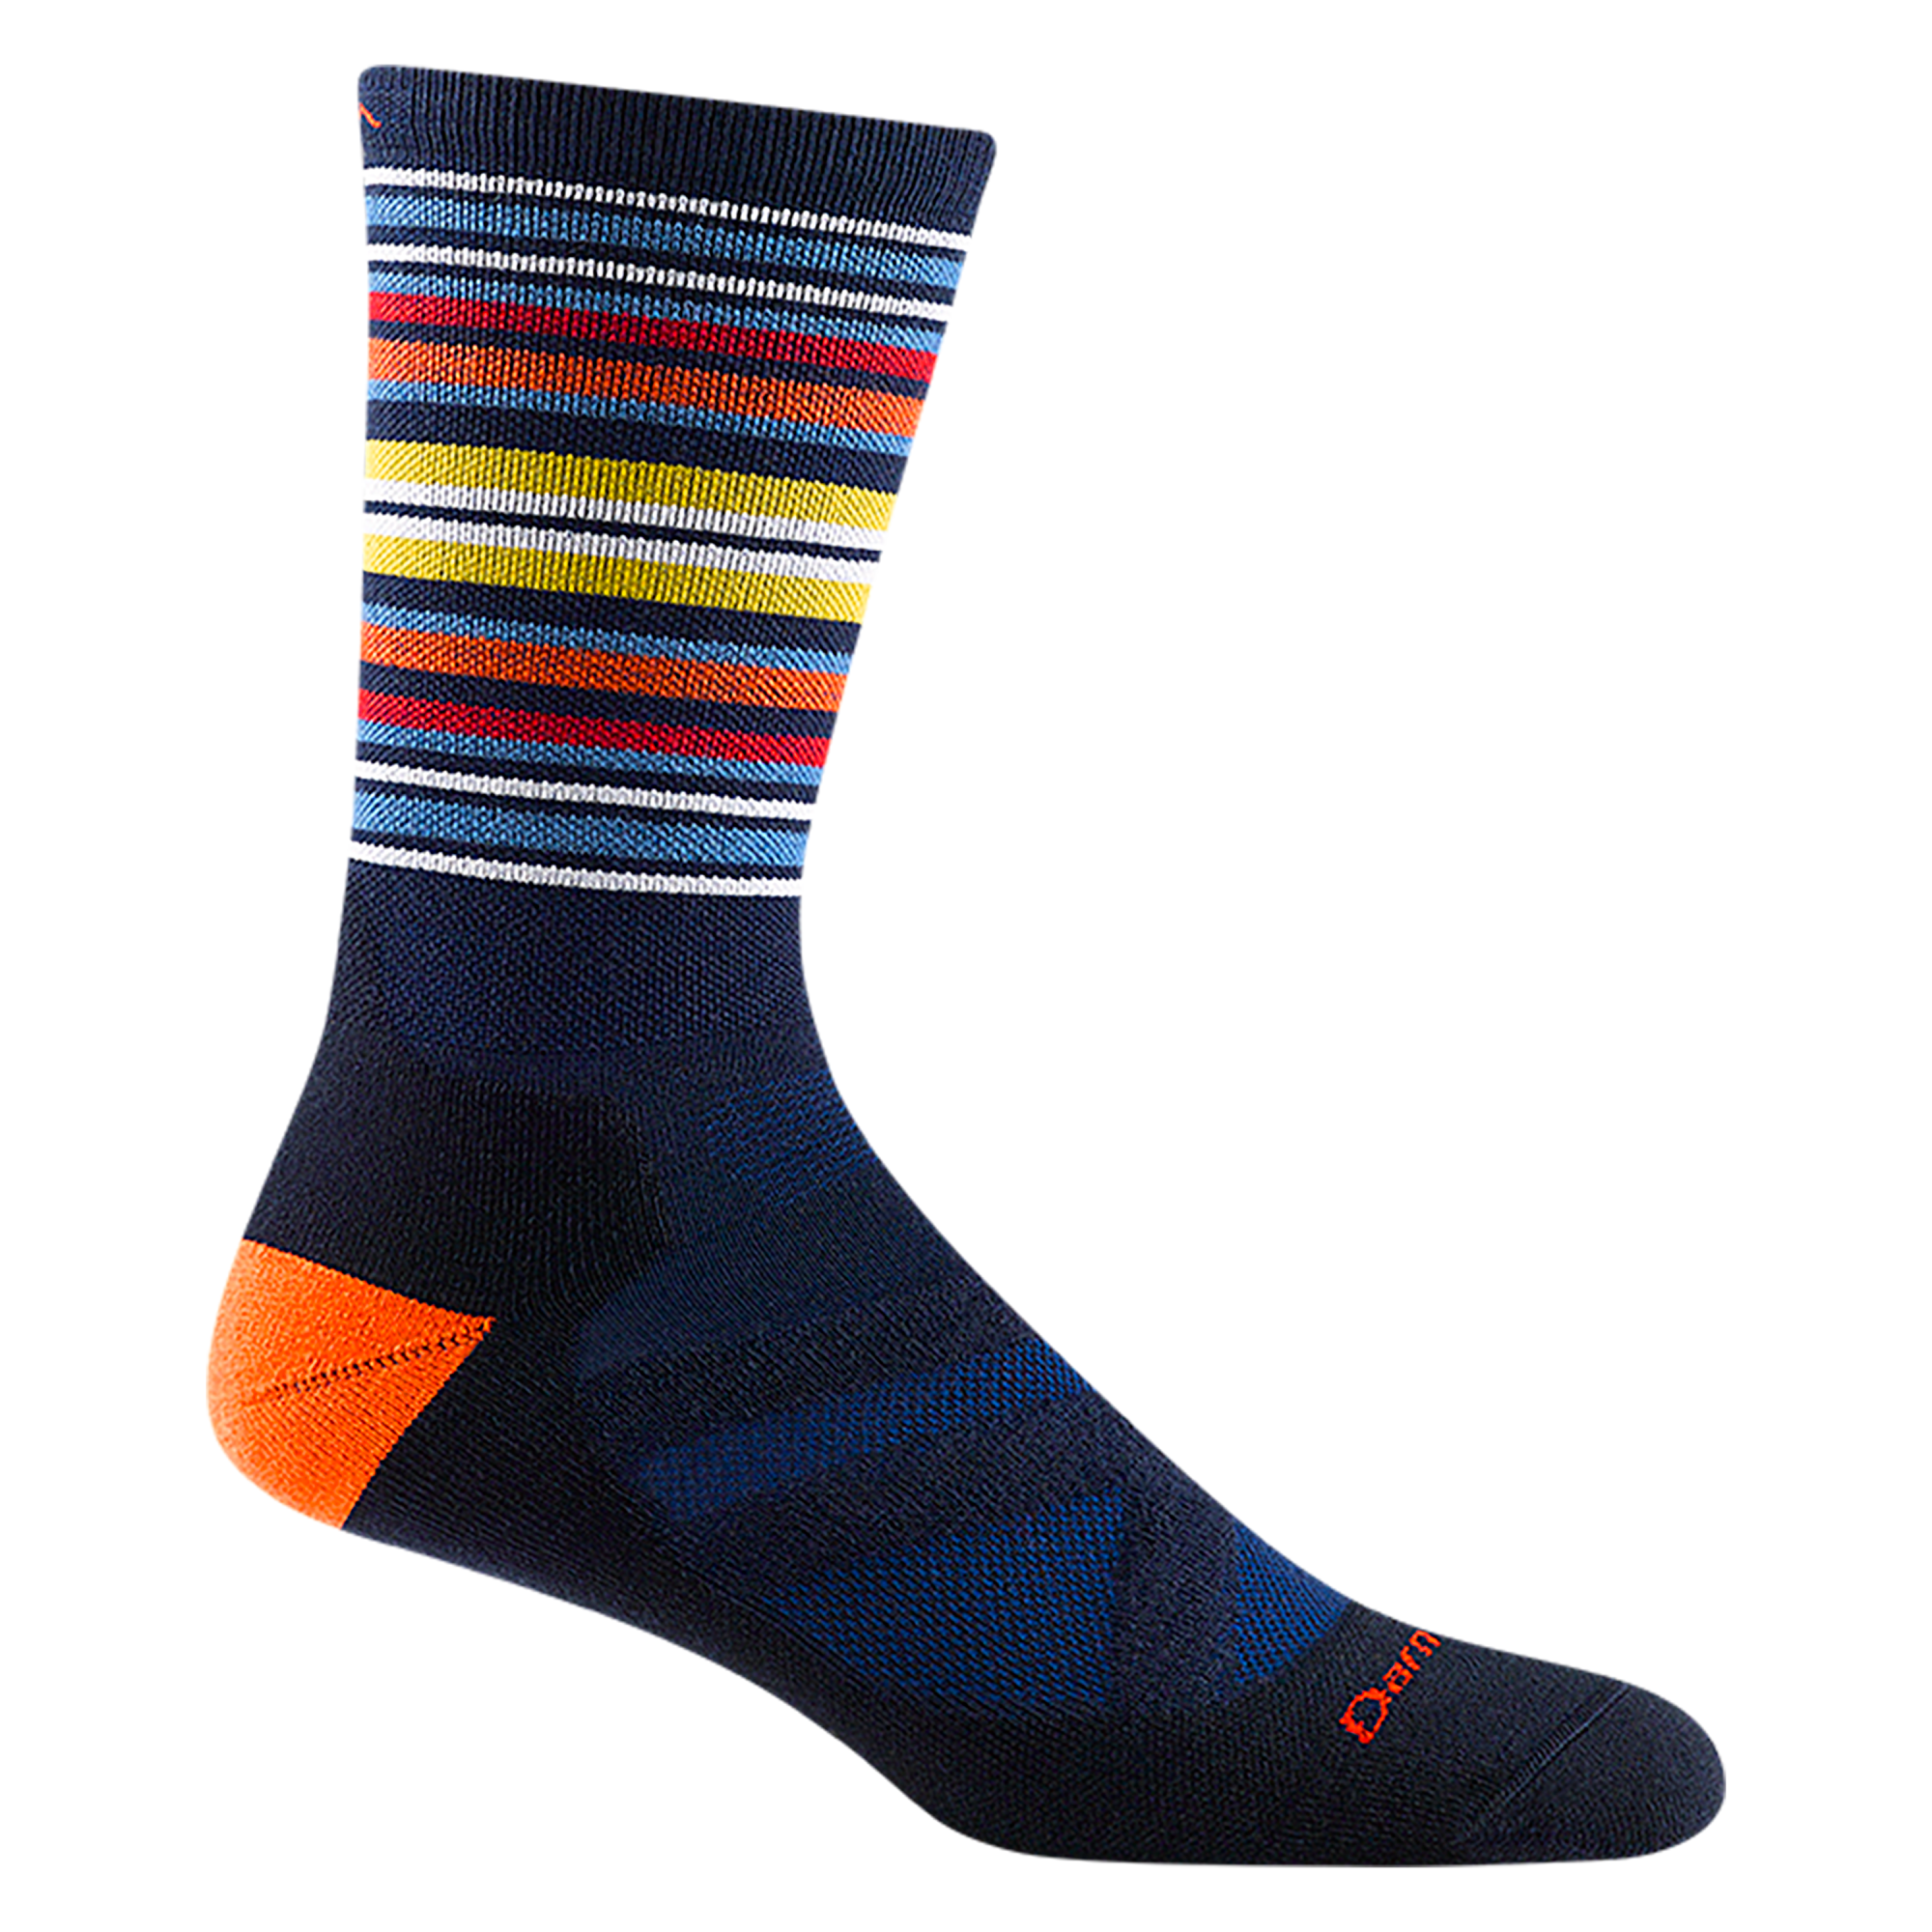 8034 men's oslo nordic boot ski sock in color navy with orange heel and yellow, blue, and orange calf striping